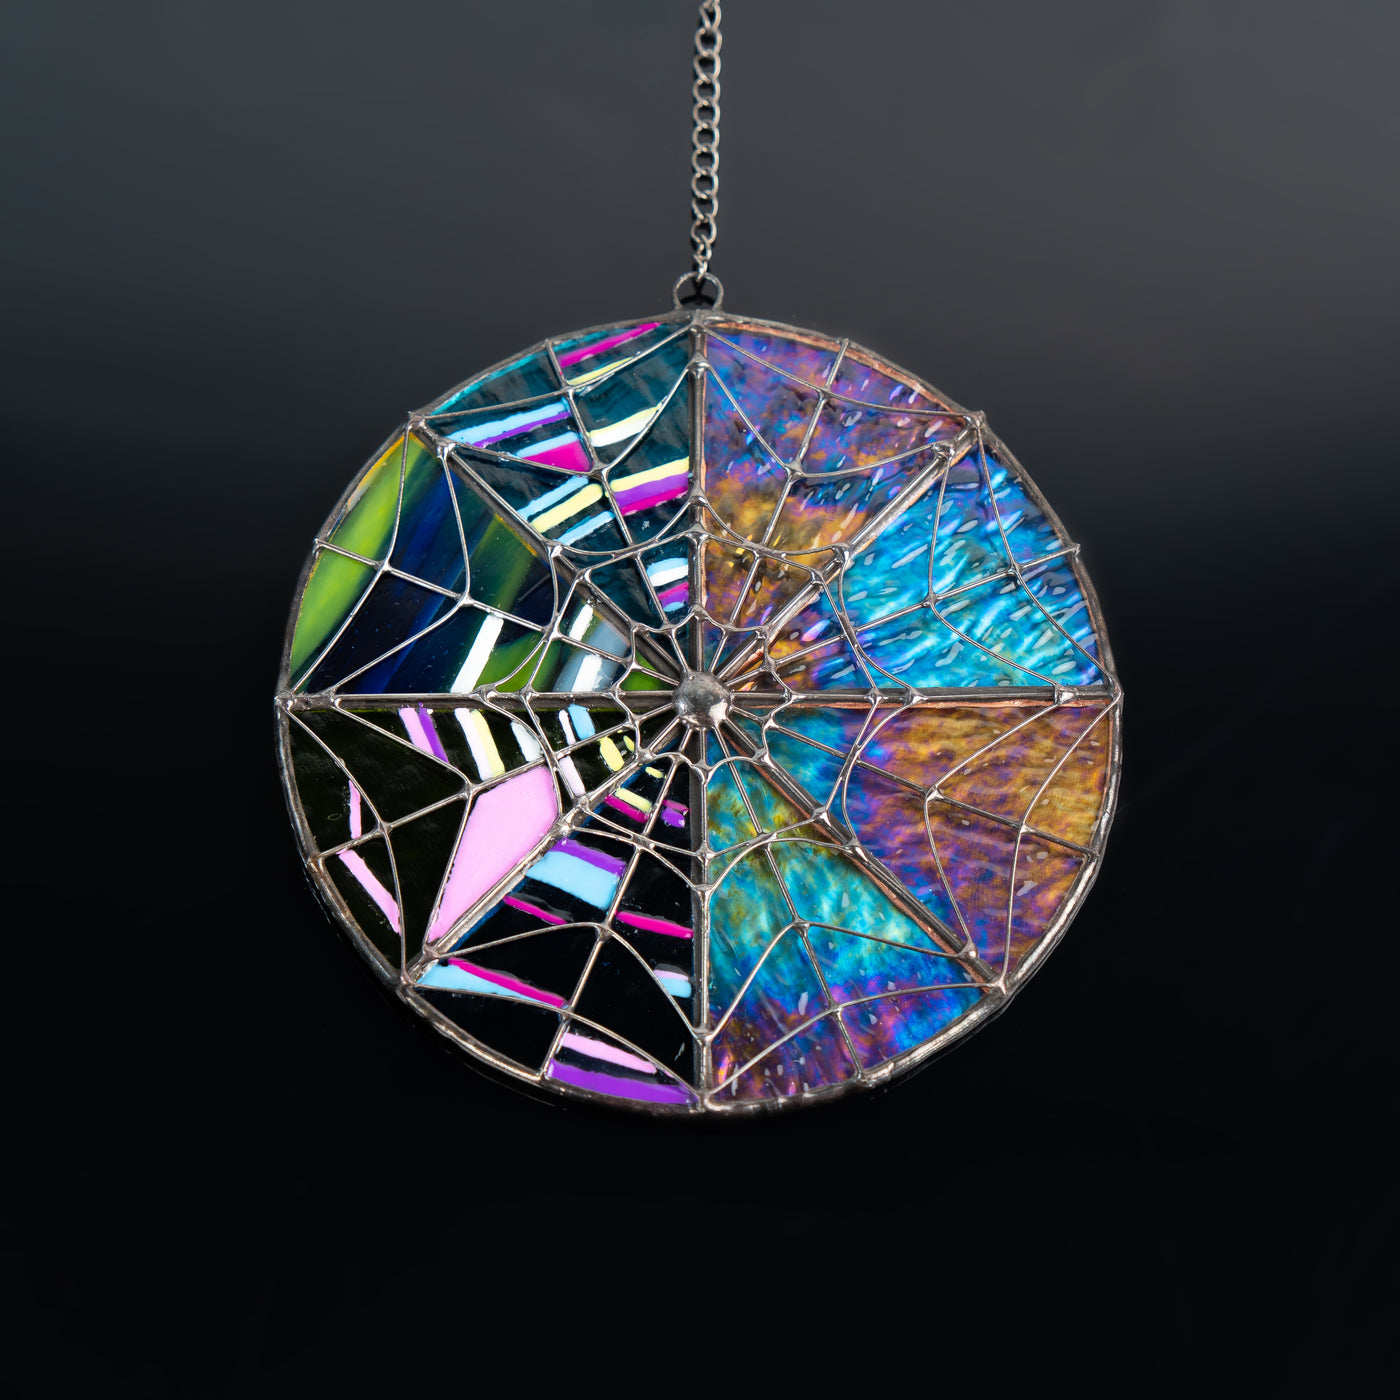 Iridescent stained glass window hanging inspired by the series Wednesday